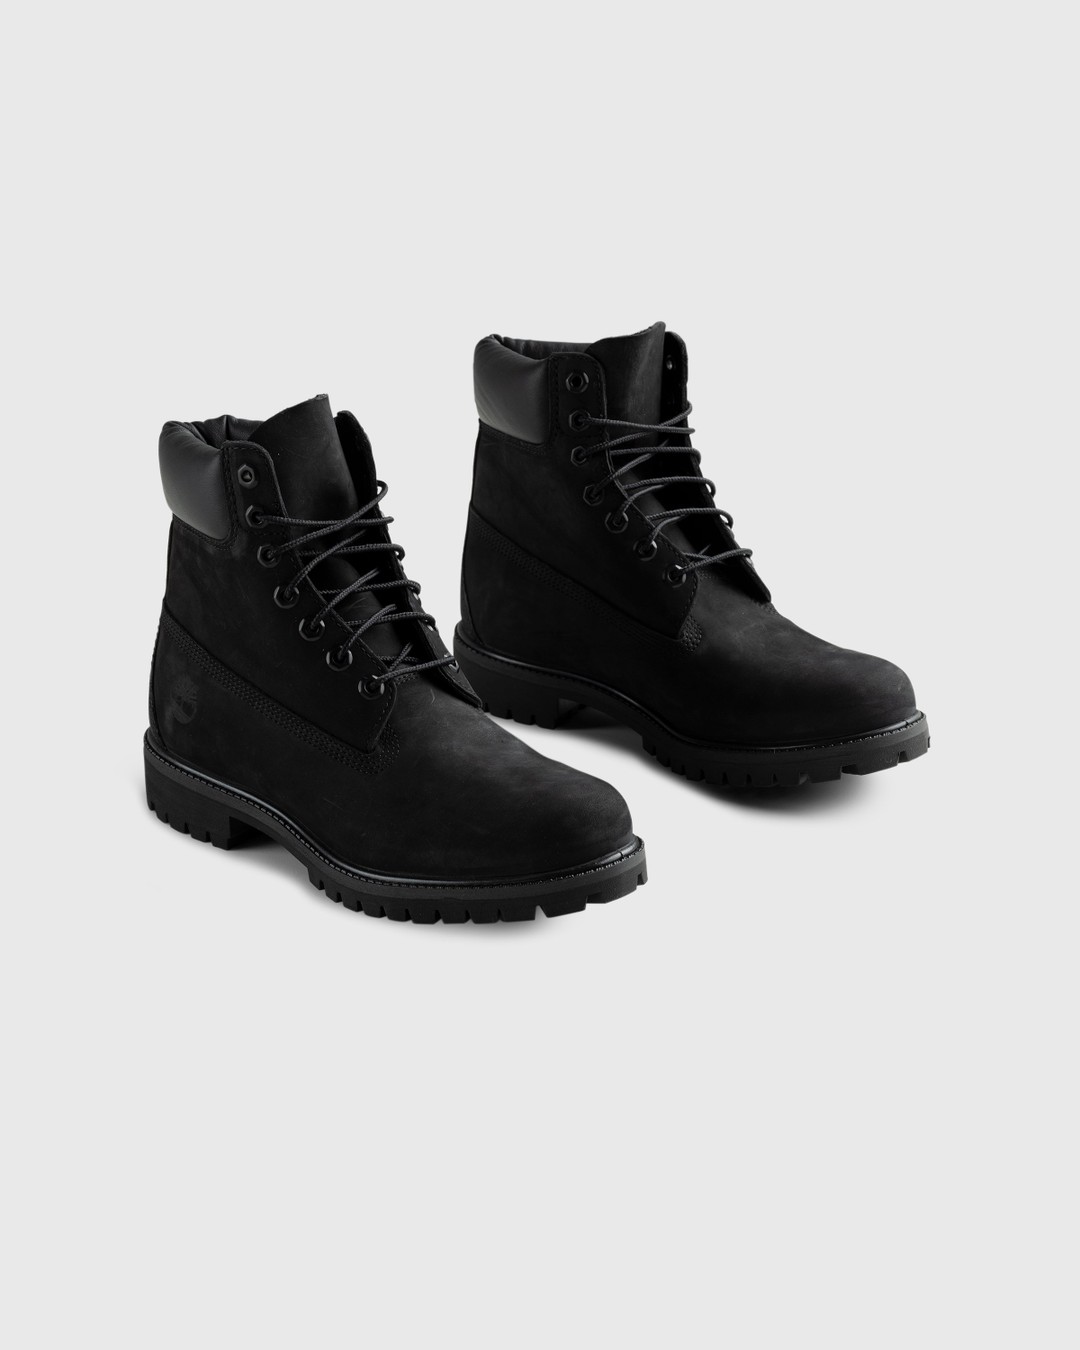 Timberland – 6 Inch Premium Boot Black - Laced Up Boots - Black - Image 3